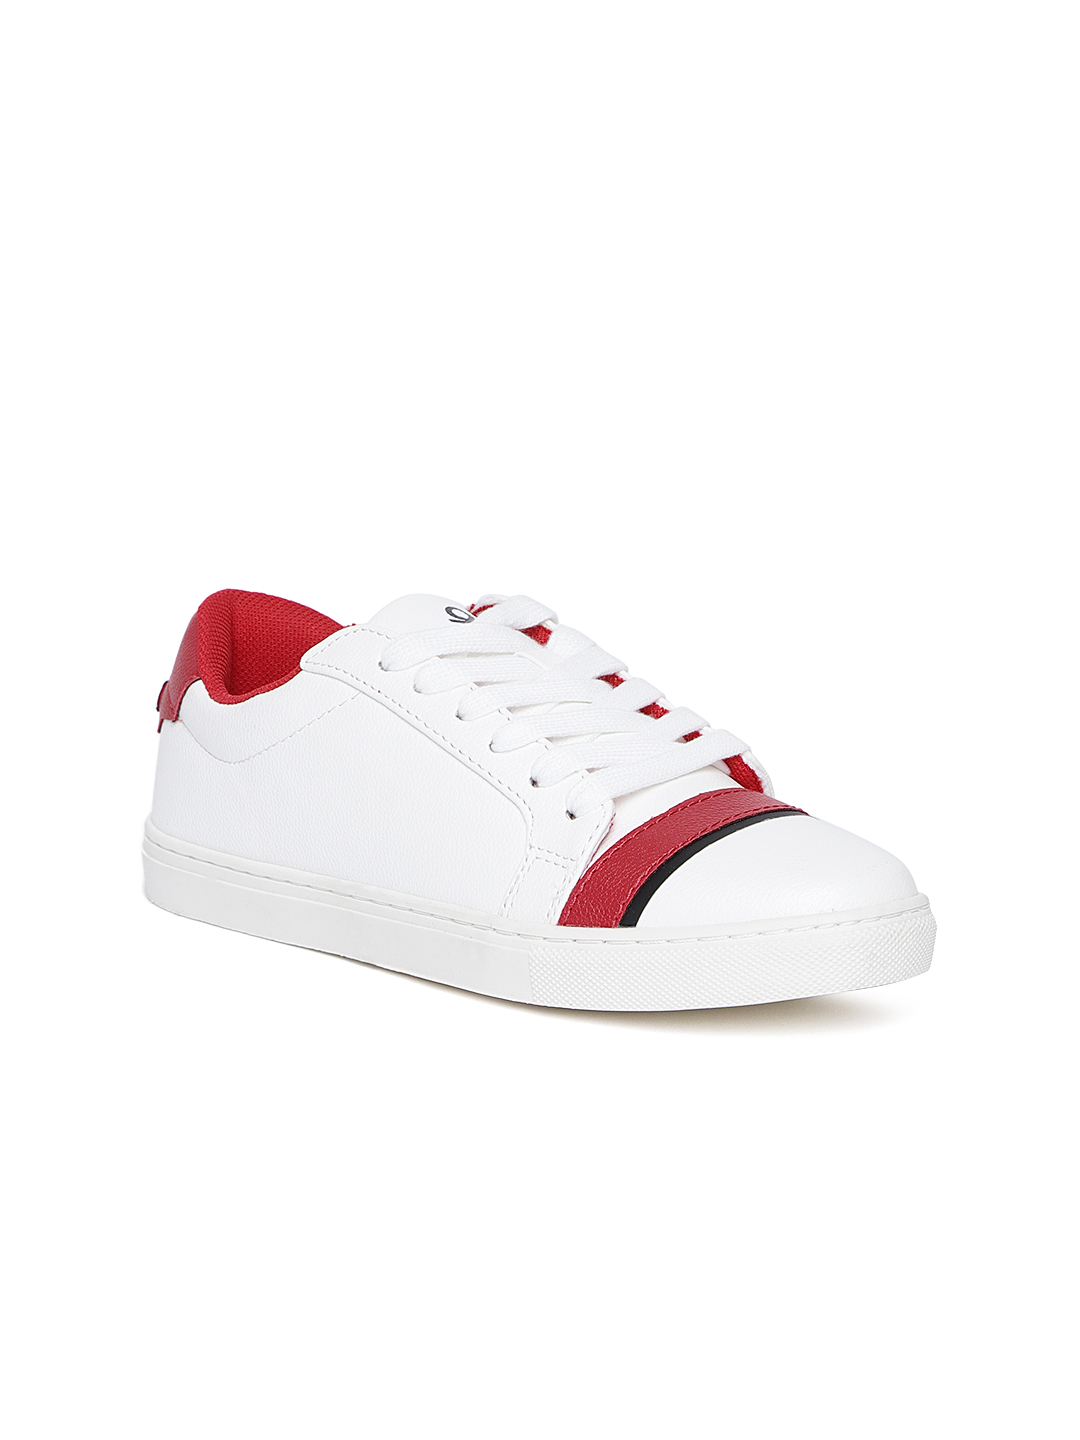 united colors of benetton white sneakers shoes